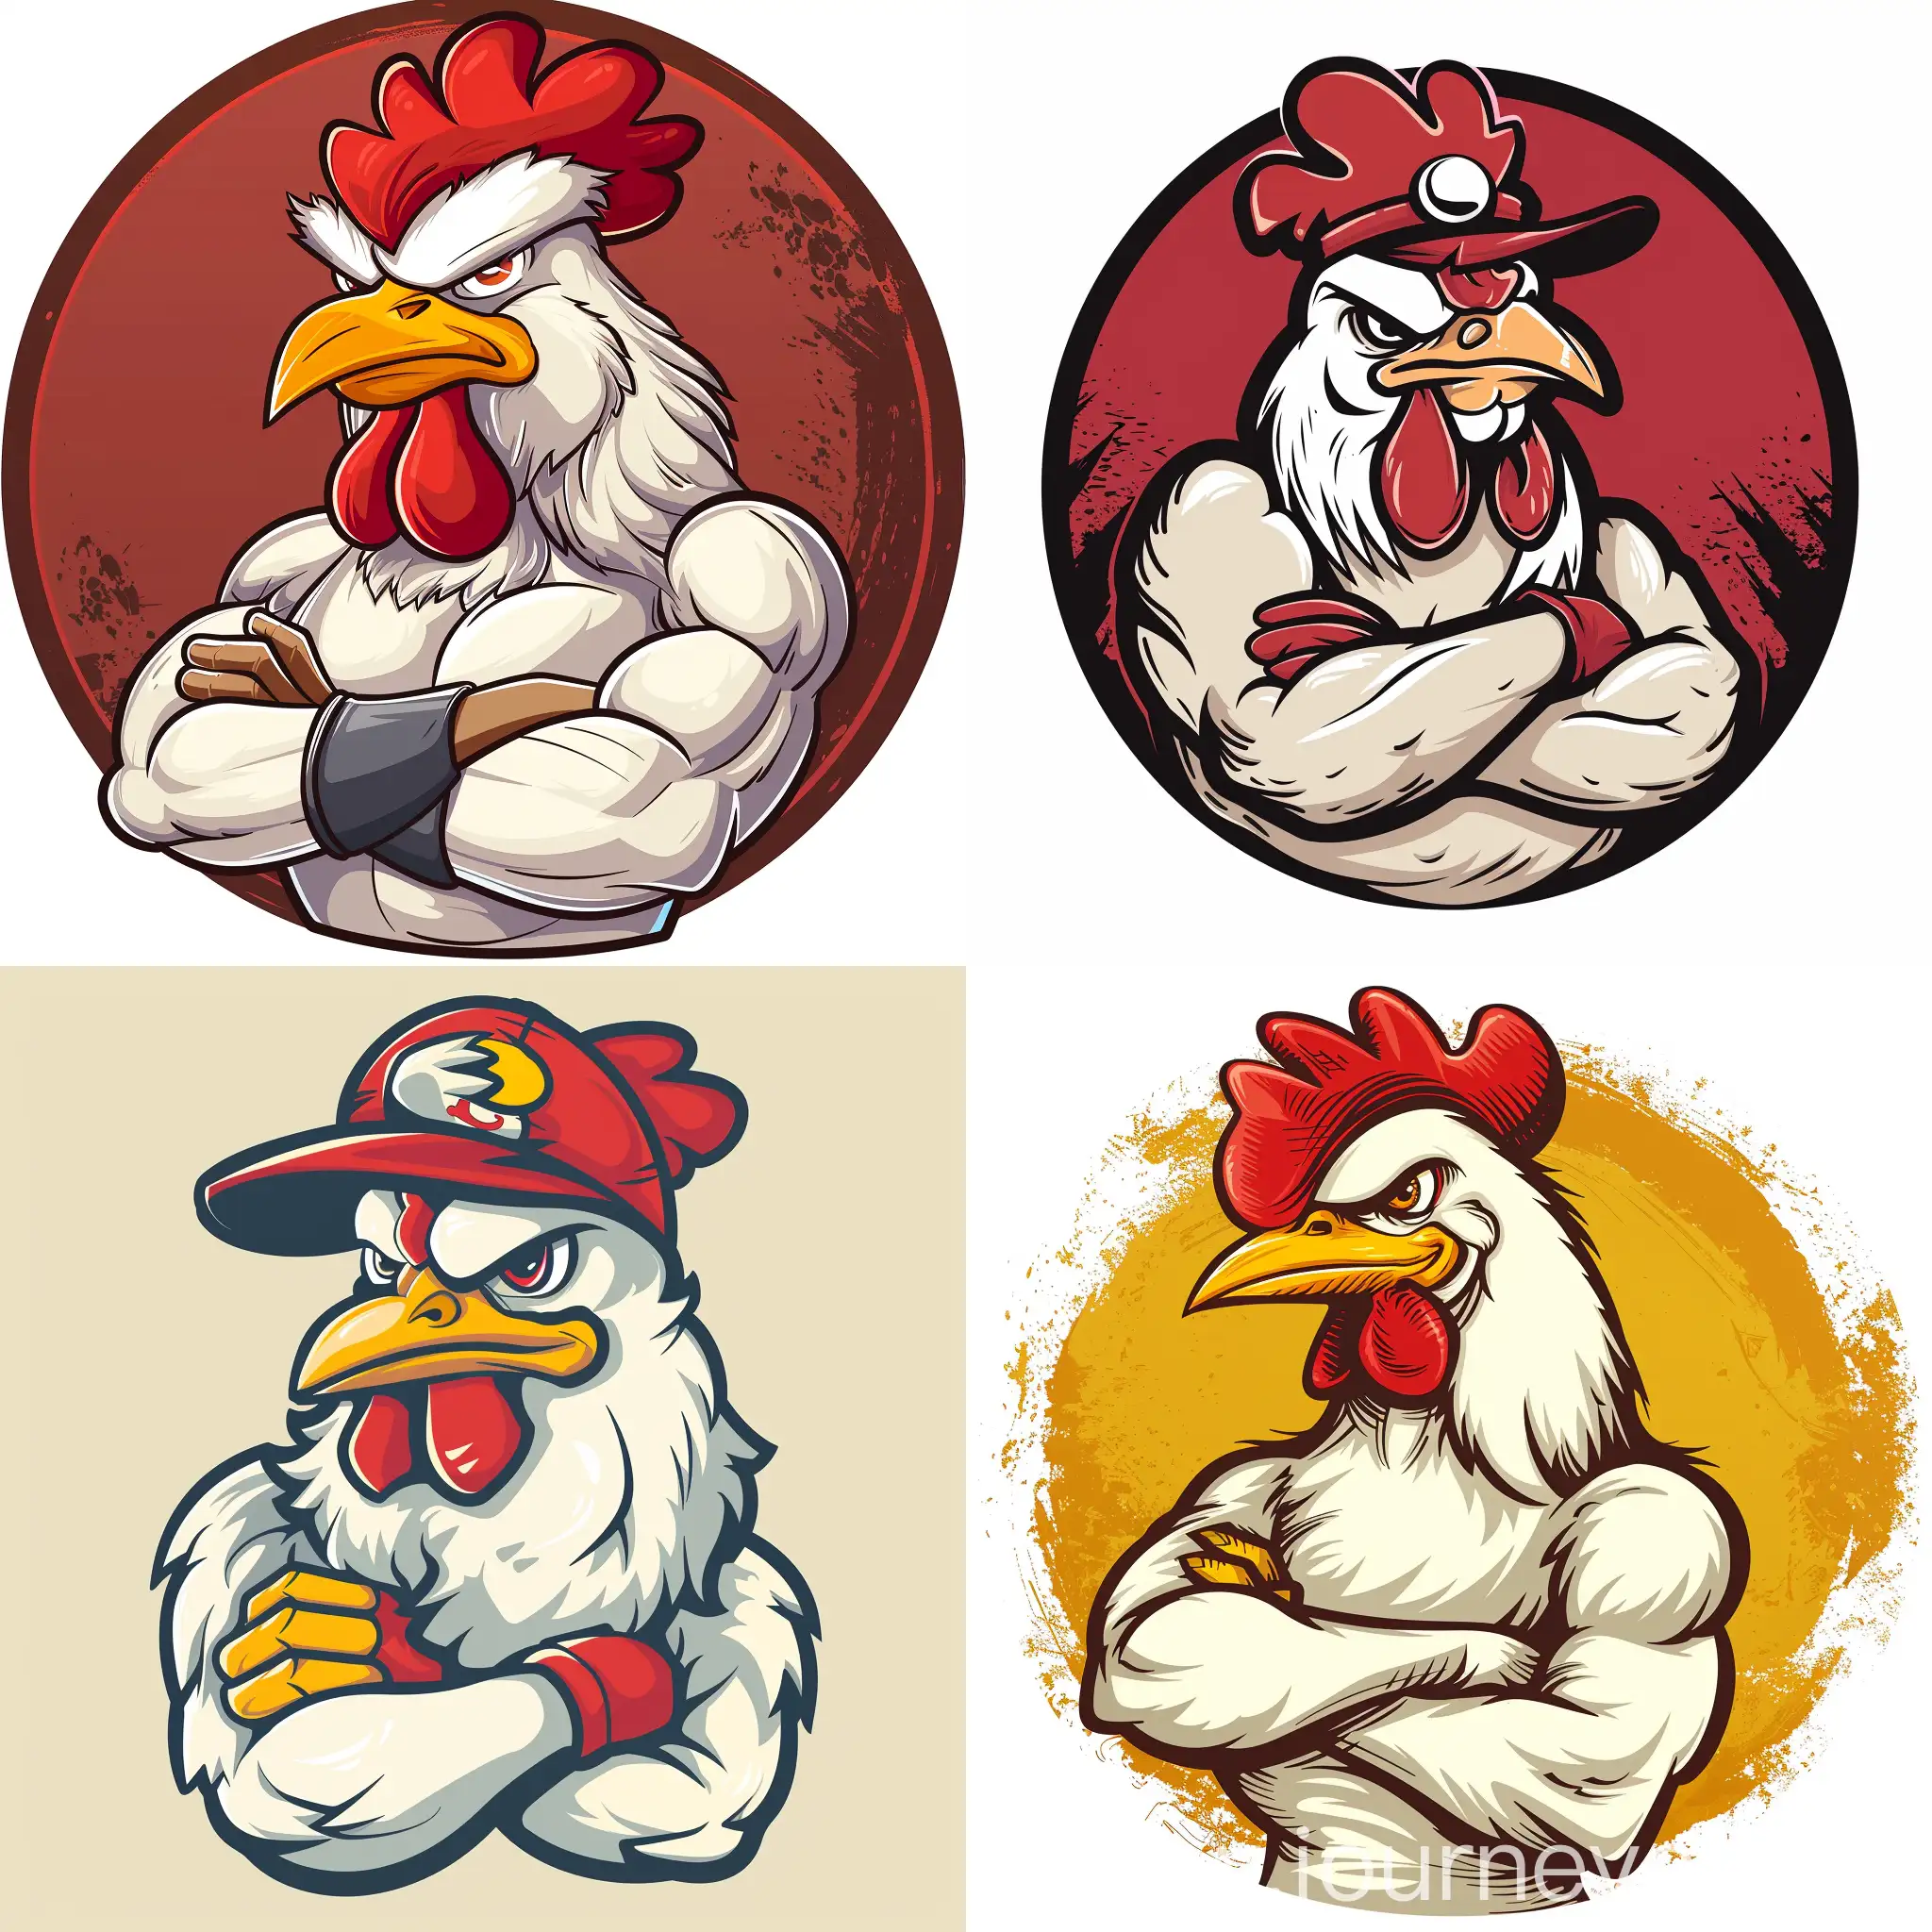 a cartoon image of a chicken with arms crossed and a red hat on his head, illustration of an angry rooster, anthropomorphized chicken, rooster!!!!, rooster, the king of rooster, illustration of a rooster, chicken, cocky, the chicken man, mascot, mascot illustration, telegram sticker, macho, the macho duck, kfc chicken, full body mascot, cocky smirk, chickens, cocky expression, high school mascot